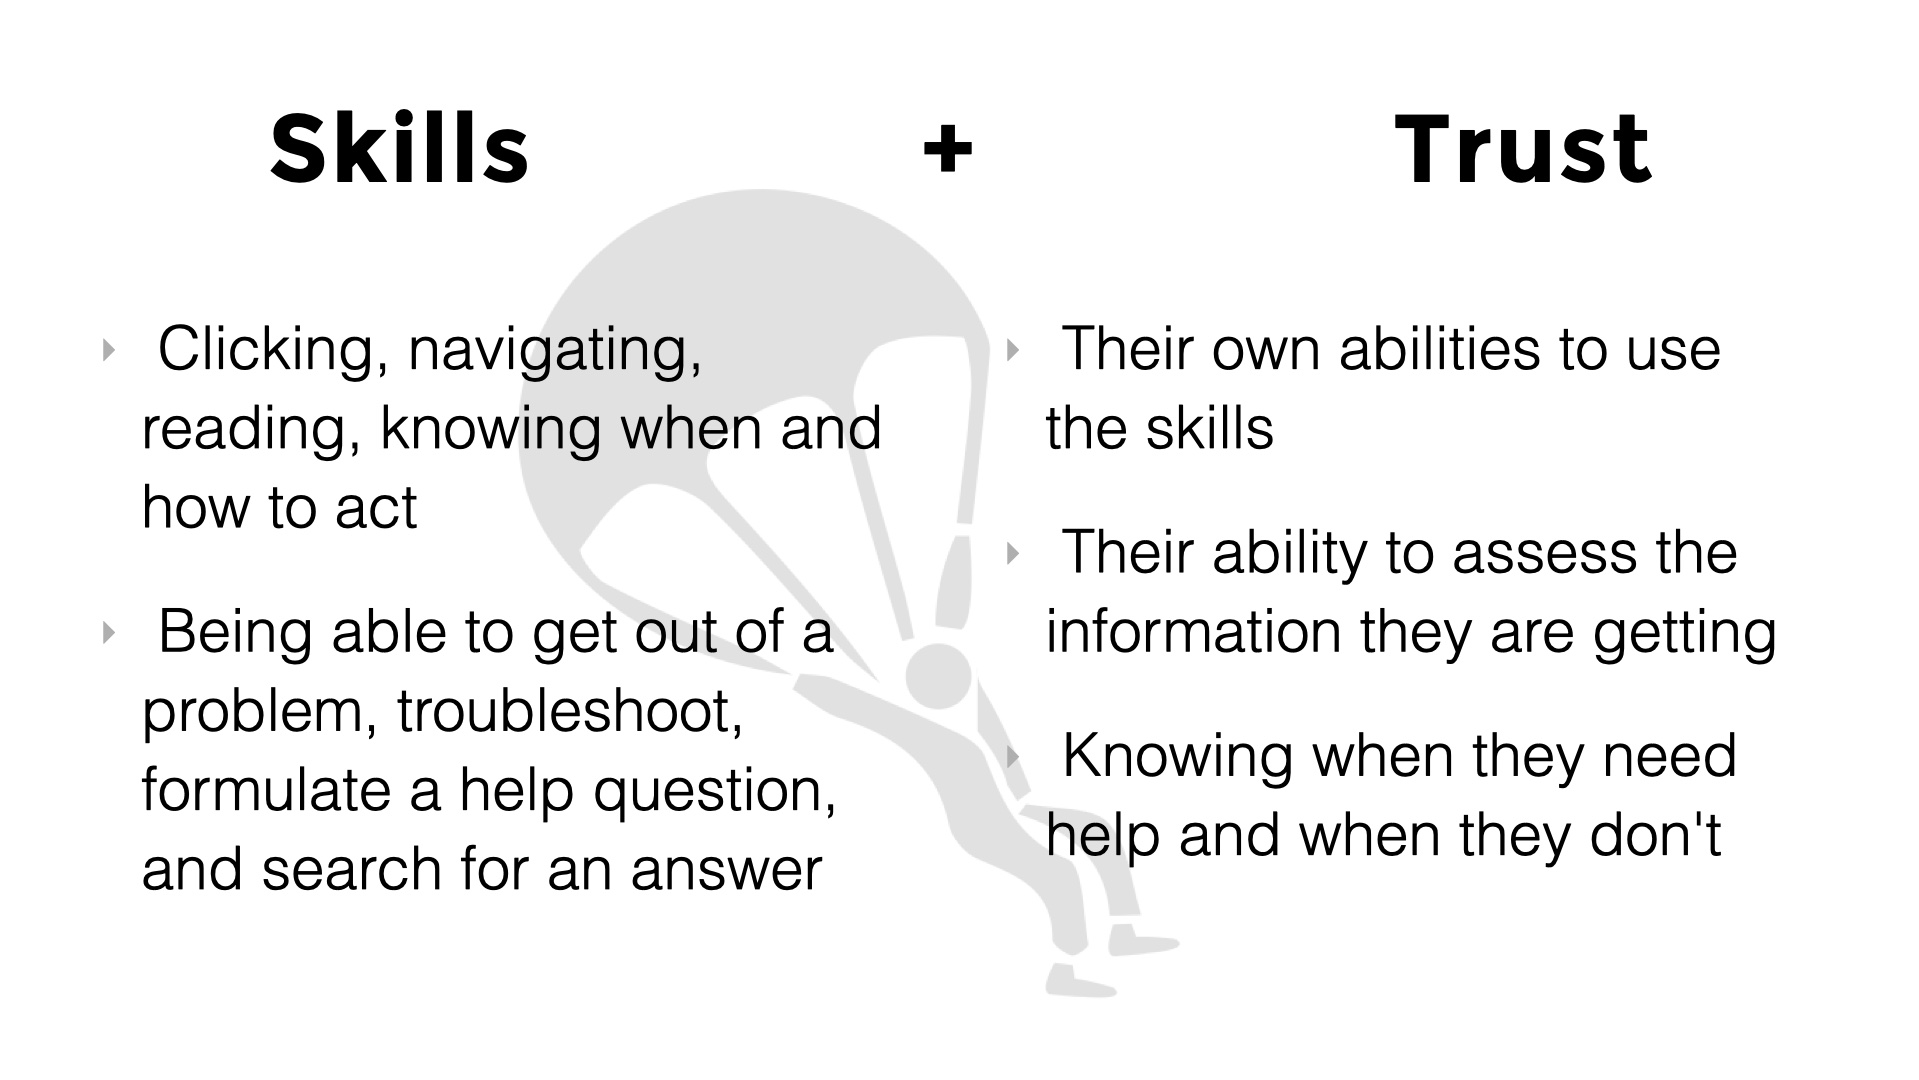 Two-column Slide. Headline: Skills + Trust. Column 1, under the word SKILLS:  Clicking, navigating, reading, knowing when and how to act,
 Being able to get out of a problem, troubleshoot, formulate a help question, and search for an answer. Column 2, under the word TRUST:  Their own abilities to use the skills,
 Their ability to assess the information they are getting,
 Knowing when they need help and when they don't